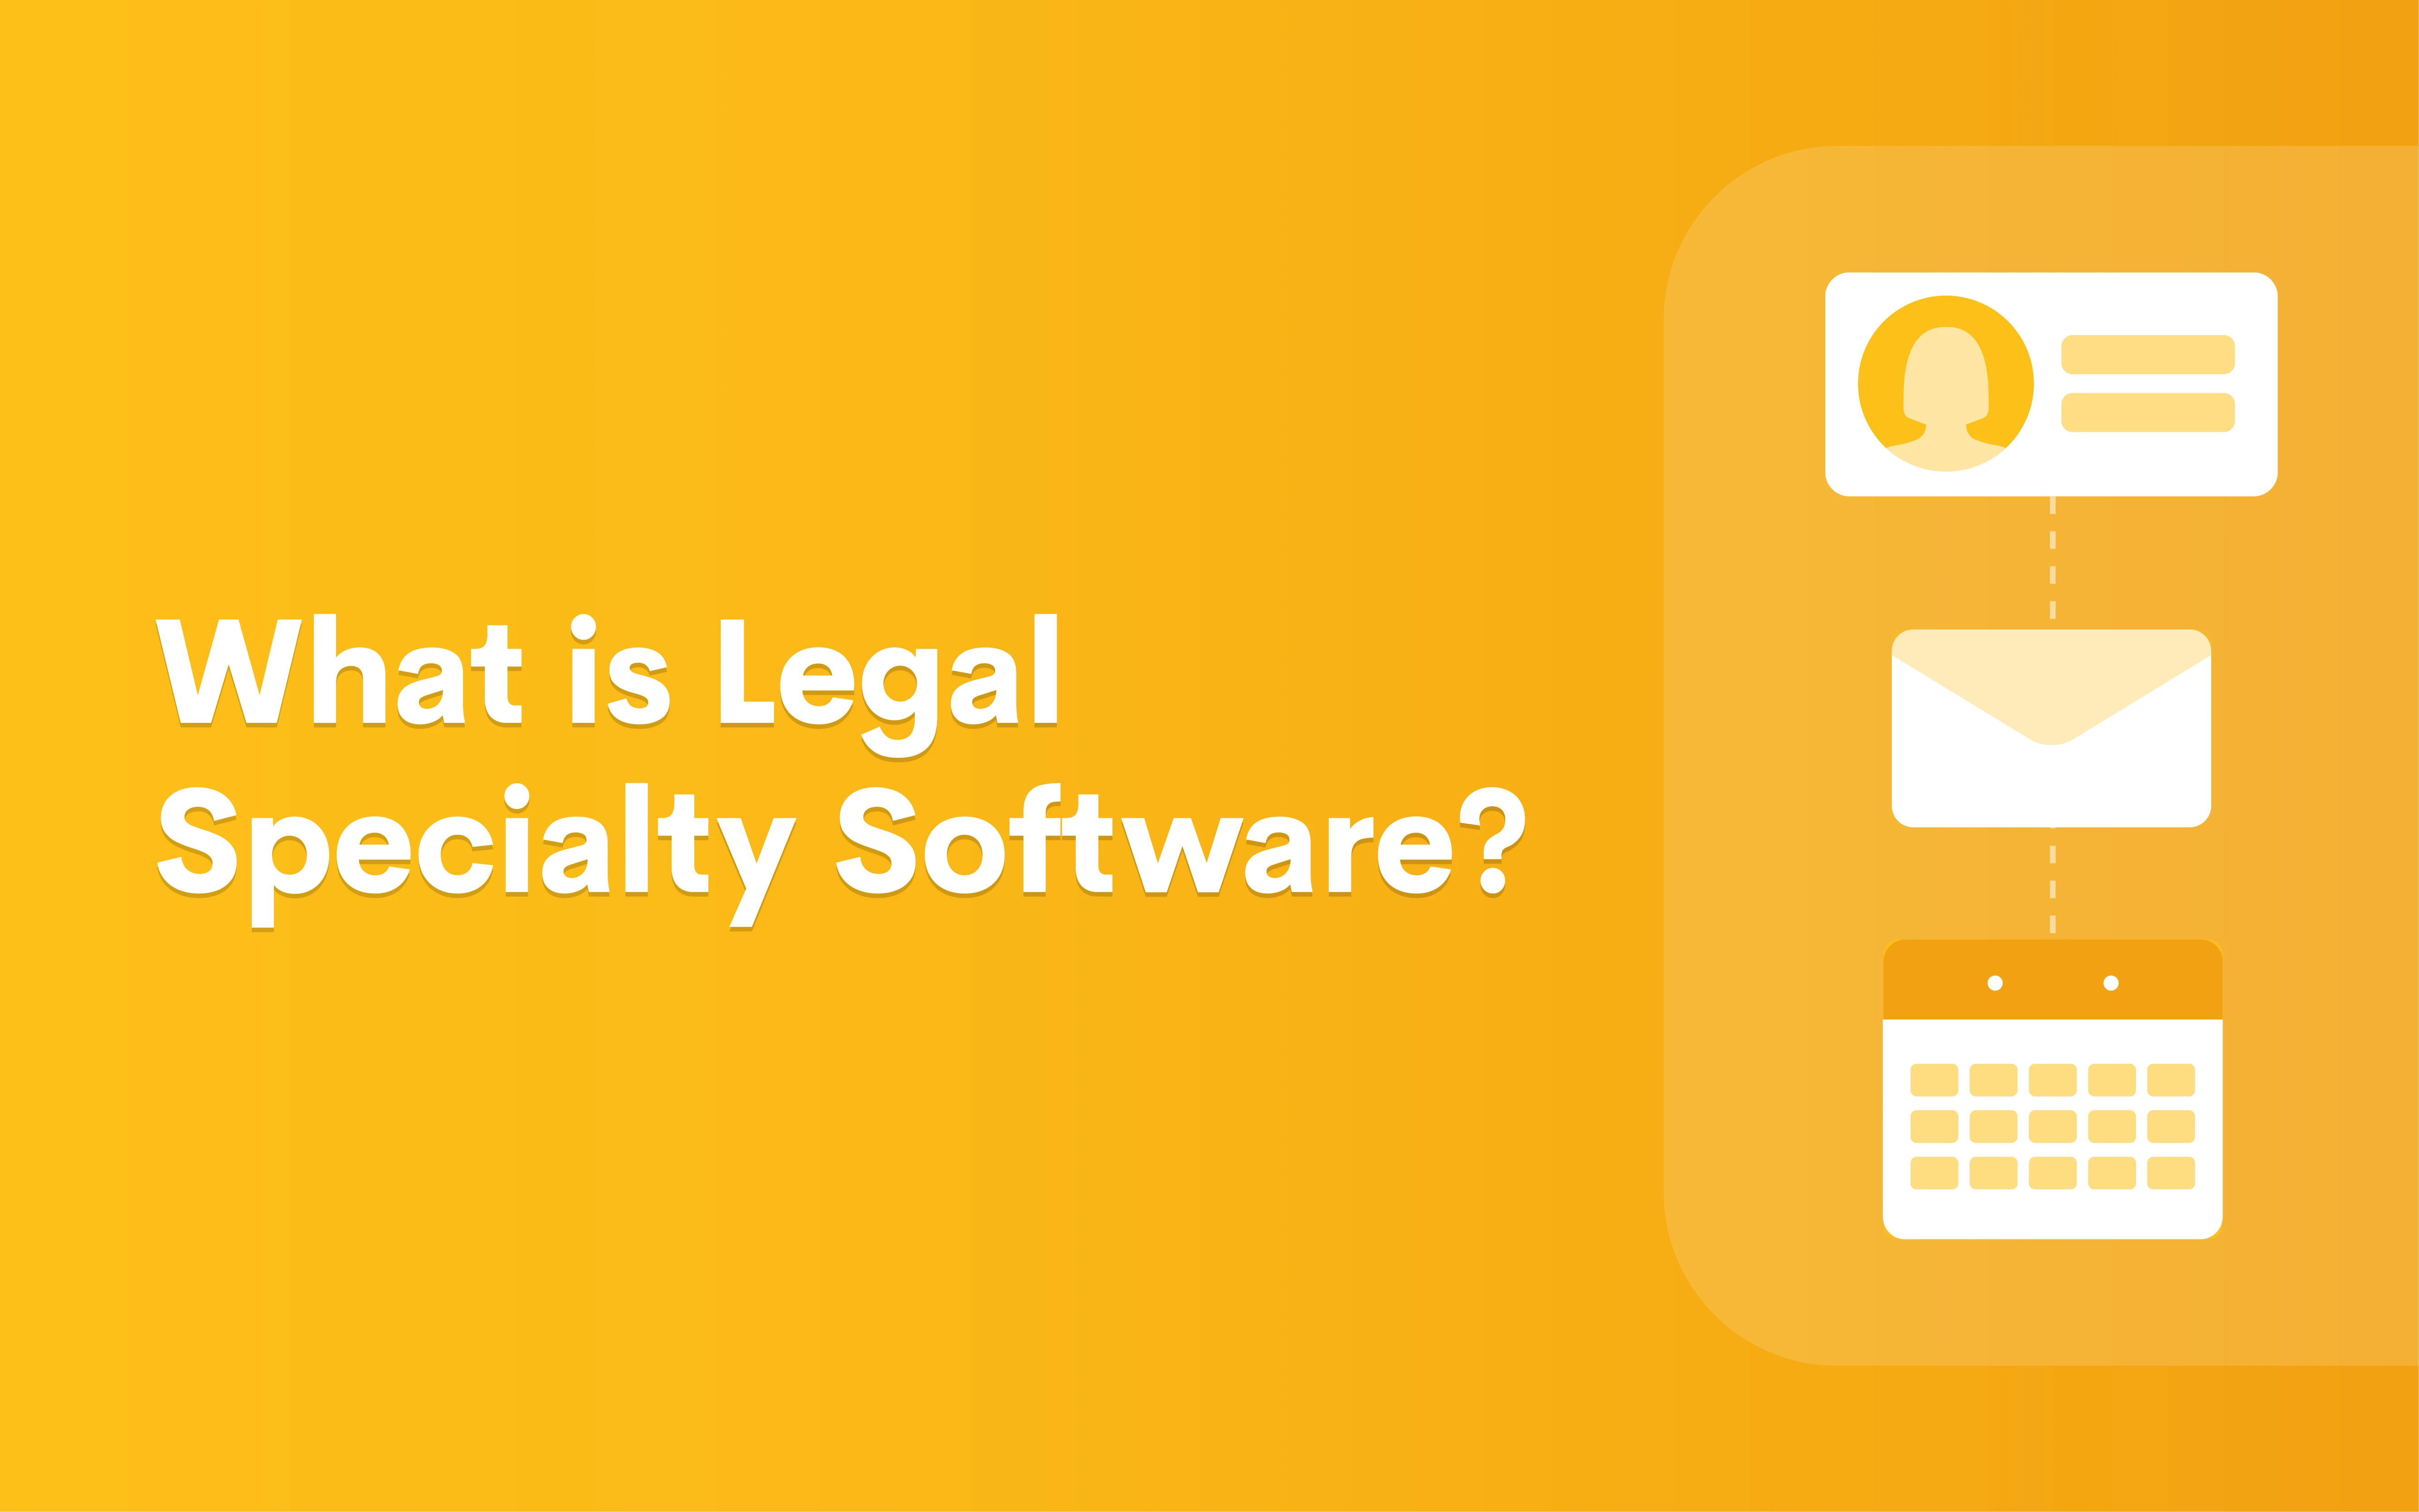 What is Legal Specialty Software?